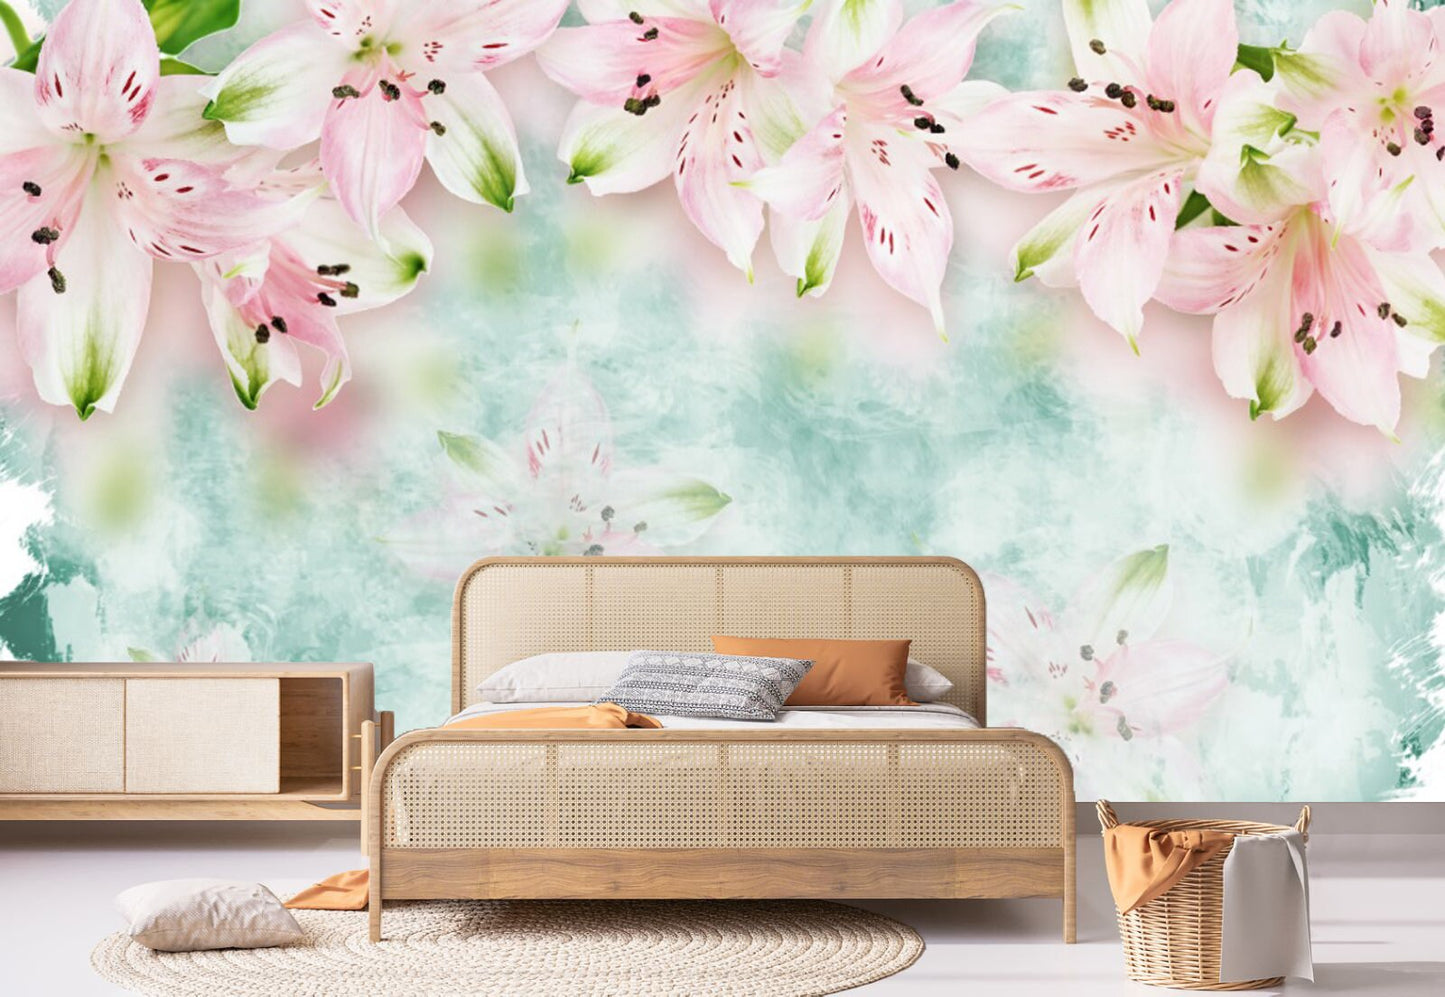 Flowers wallpaper Floral Peel and stick wallpaper Wall mural peel and stick adhesive wallpaper Botanical removable wallpaper